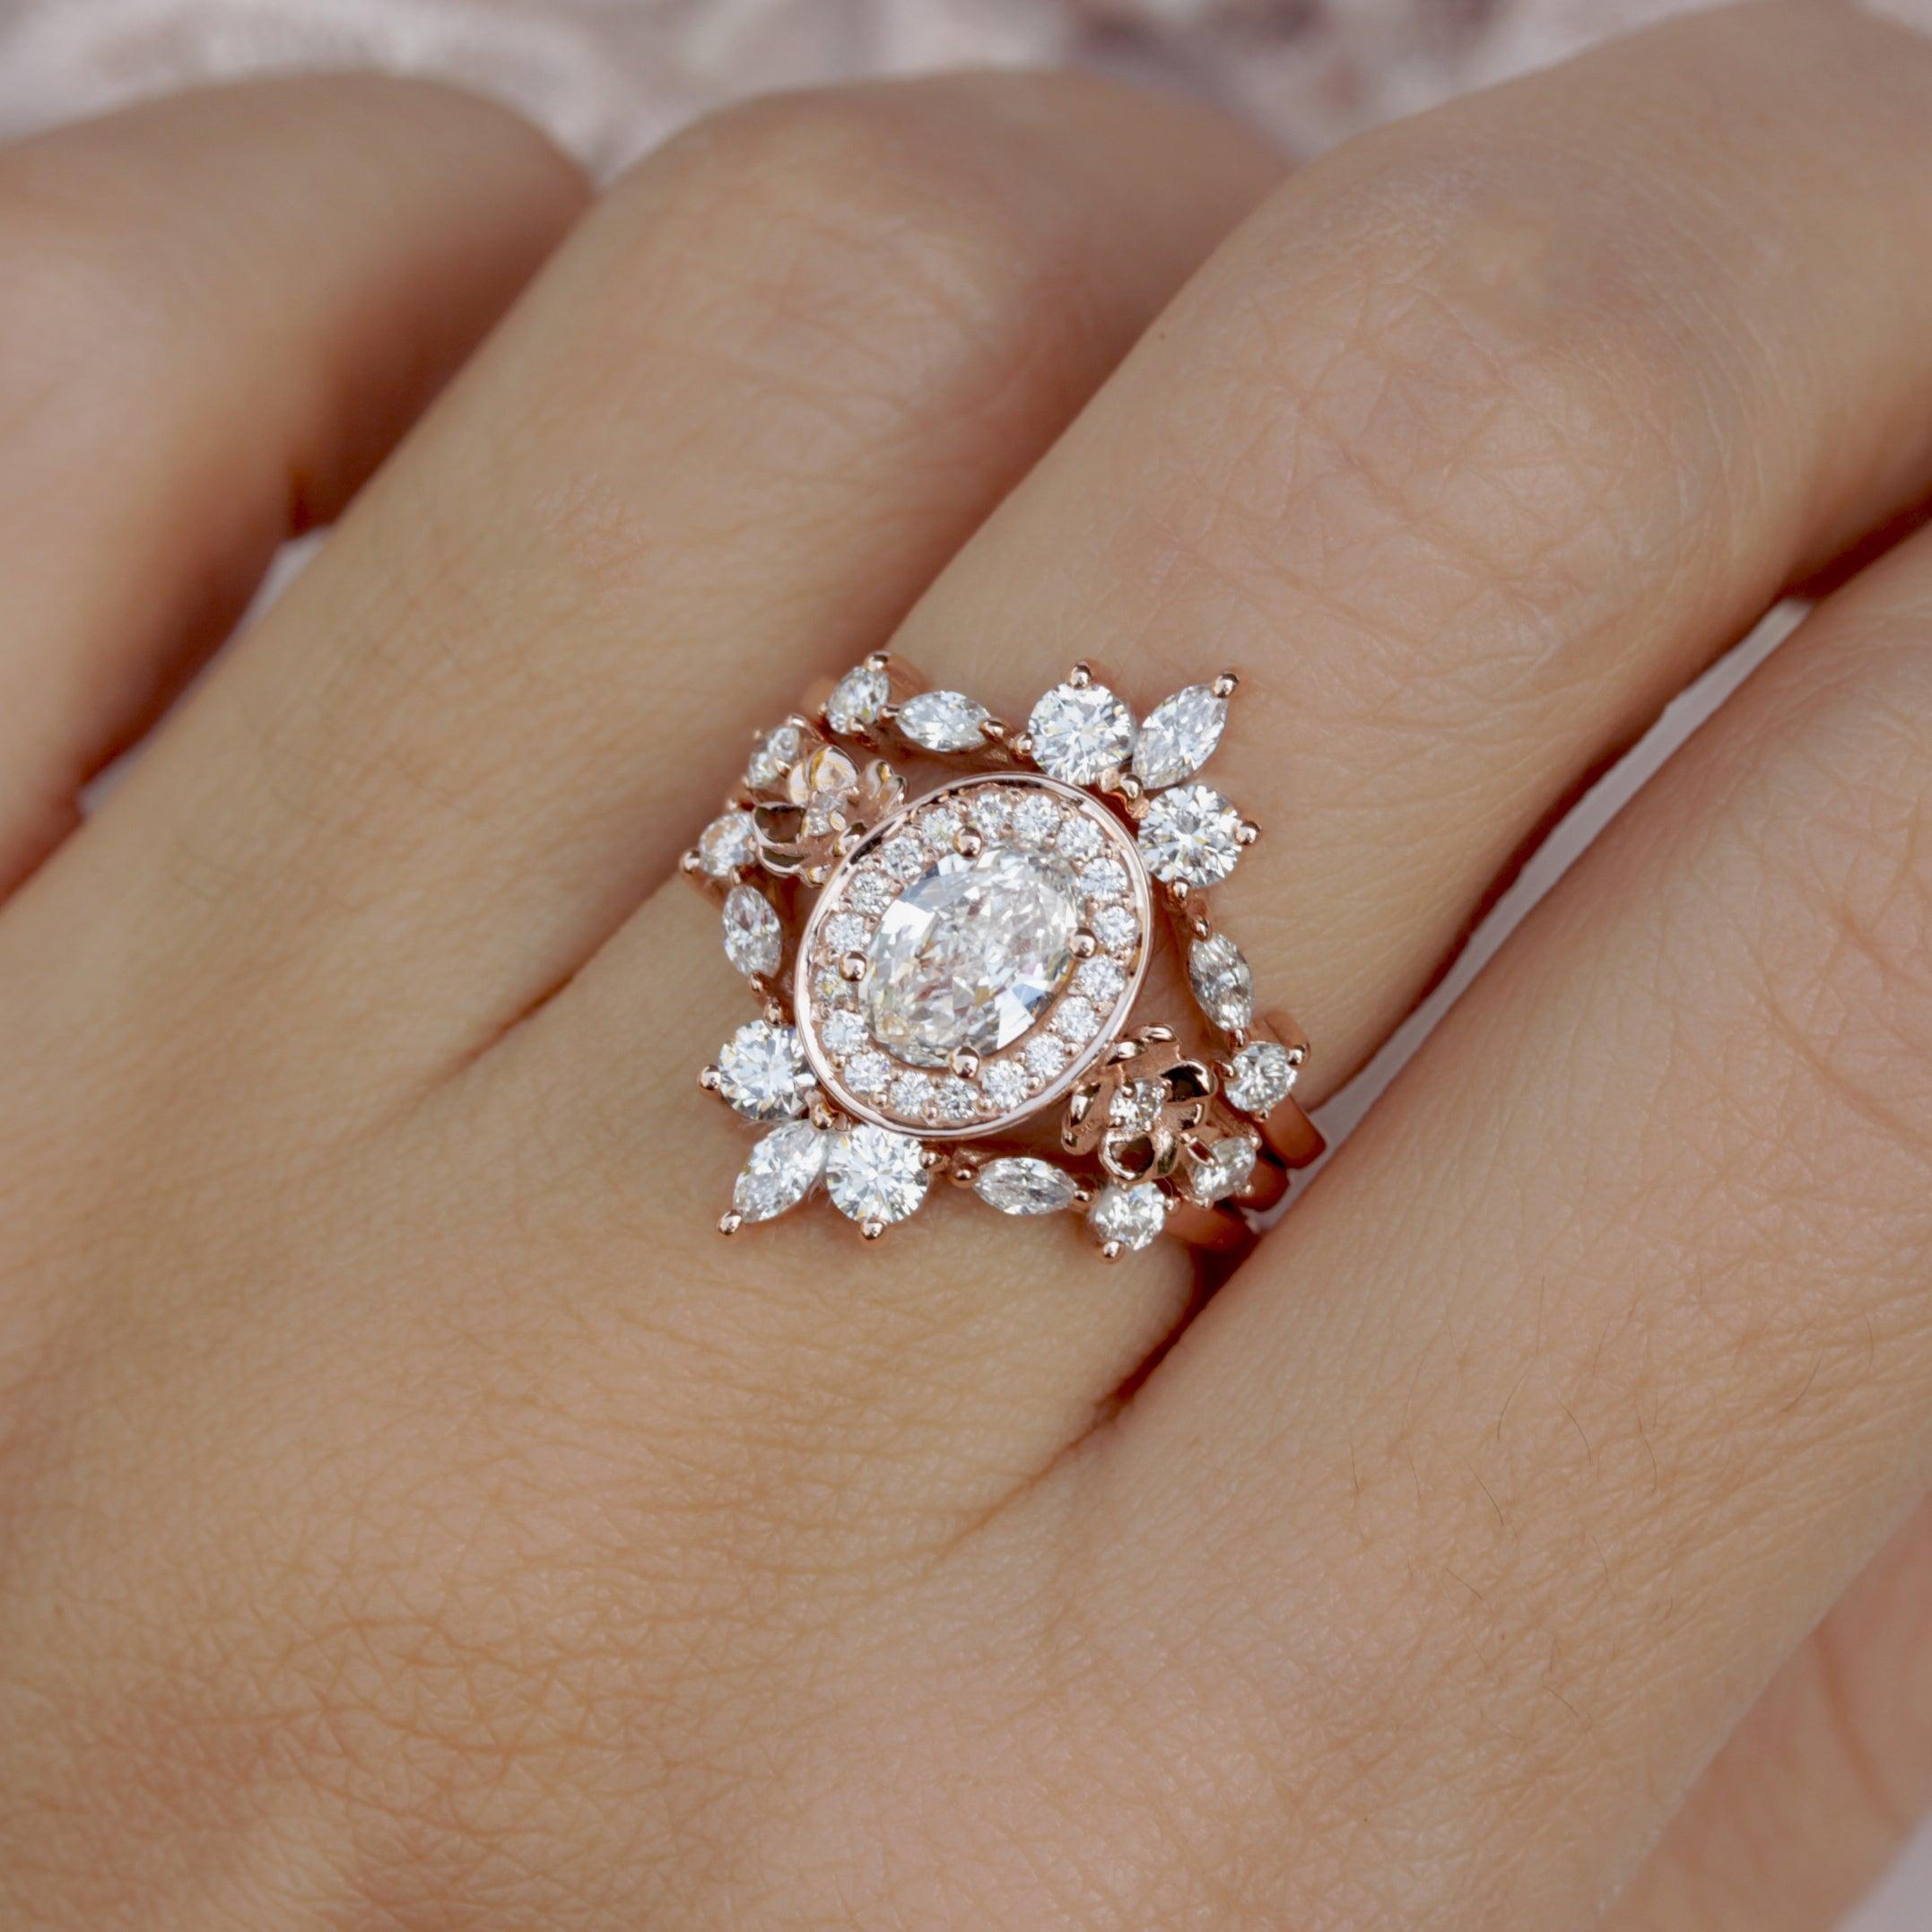 Beautiful Oval diamond unique engagement ring - 